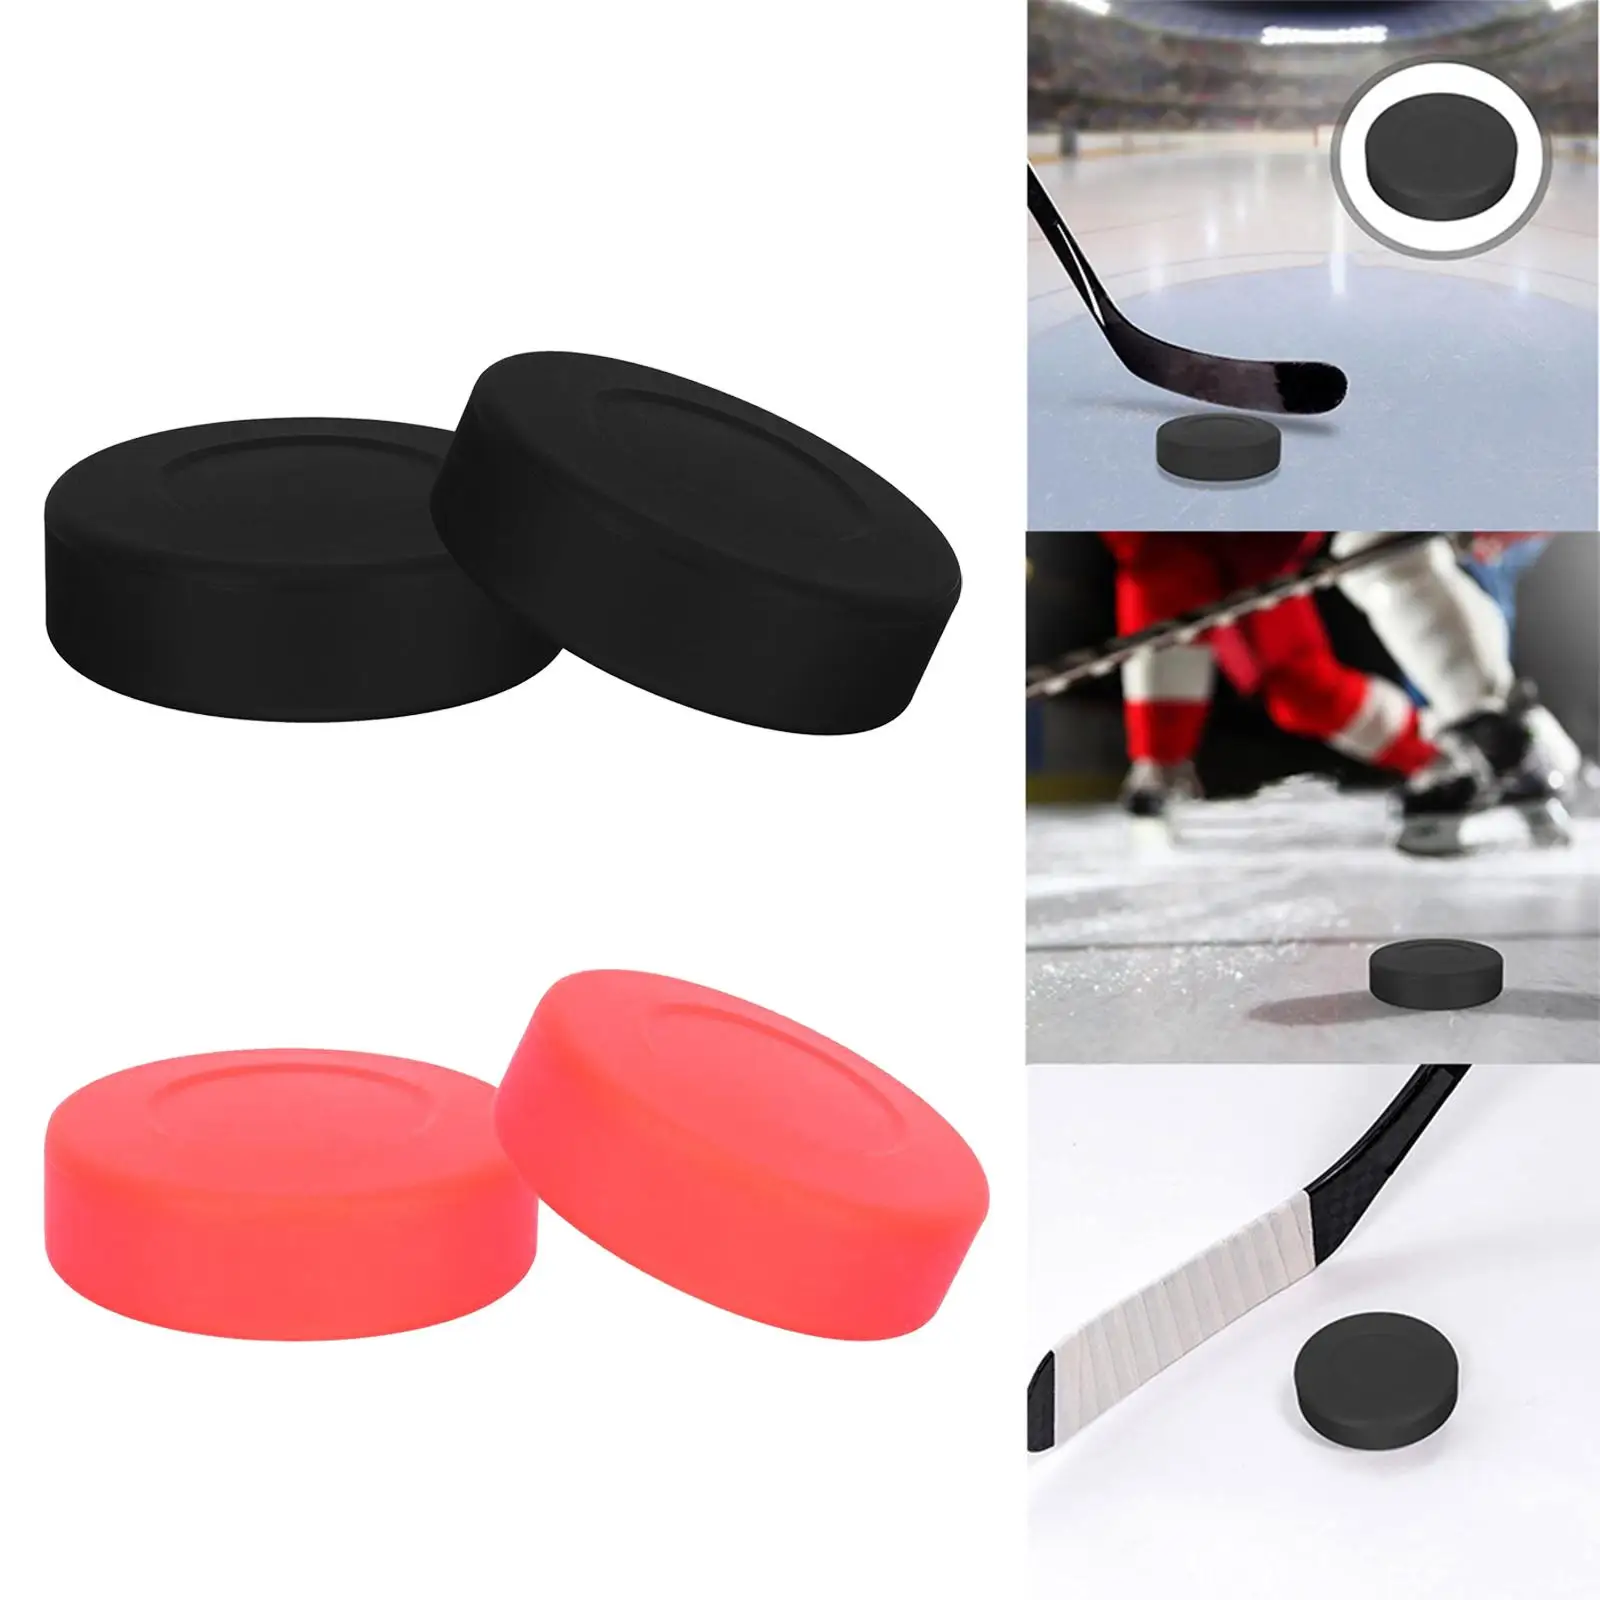 2 Pieces Ice Hockey Puck Simple to Use Hockey Ball for Adults Kids Athletes